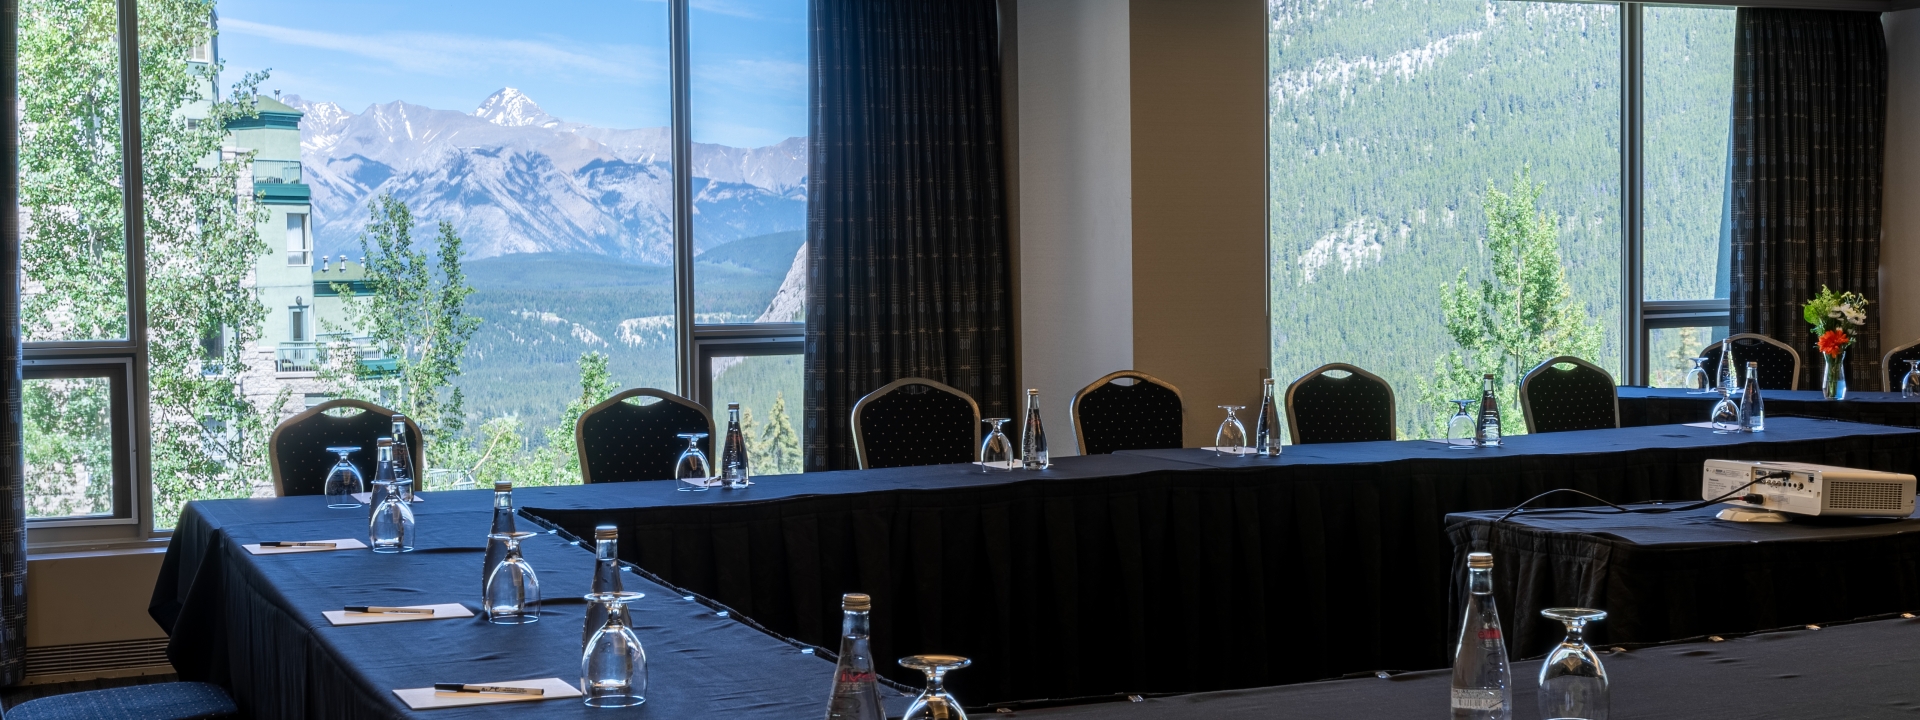 A conference room at the rimrock resort